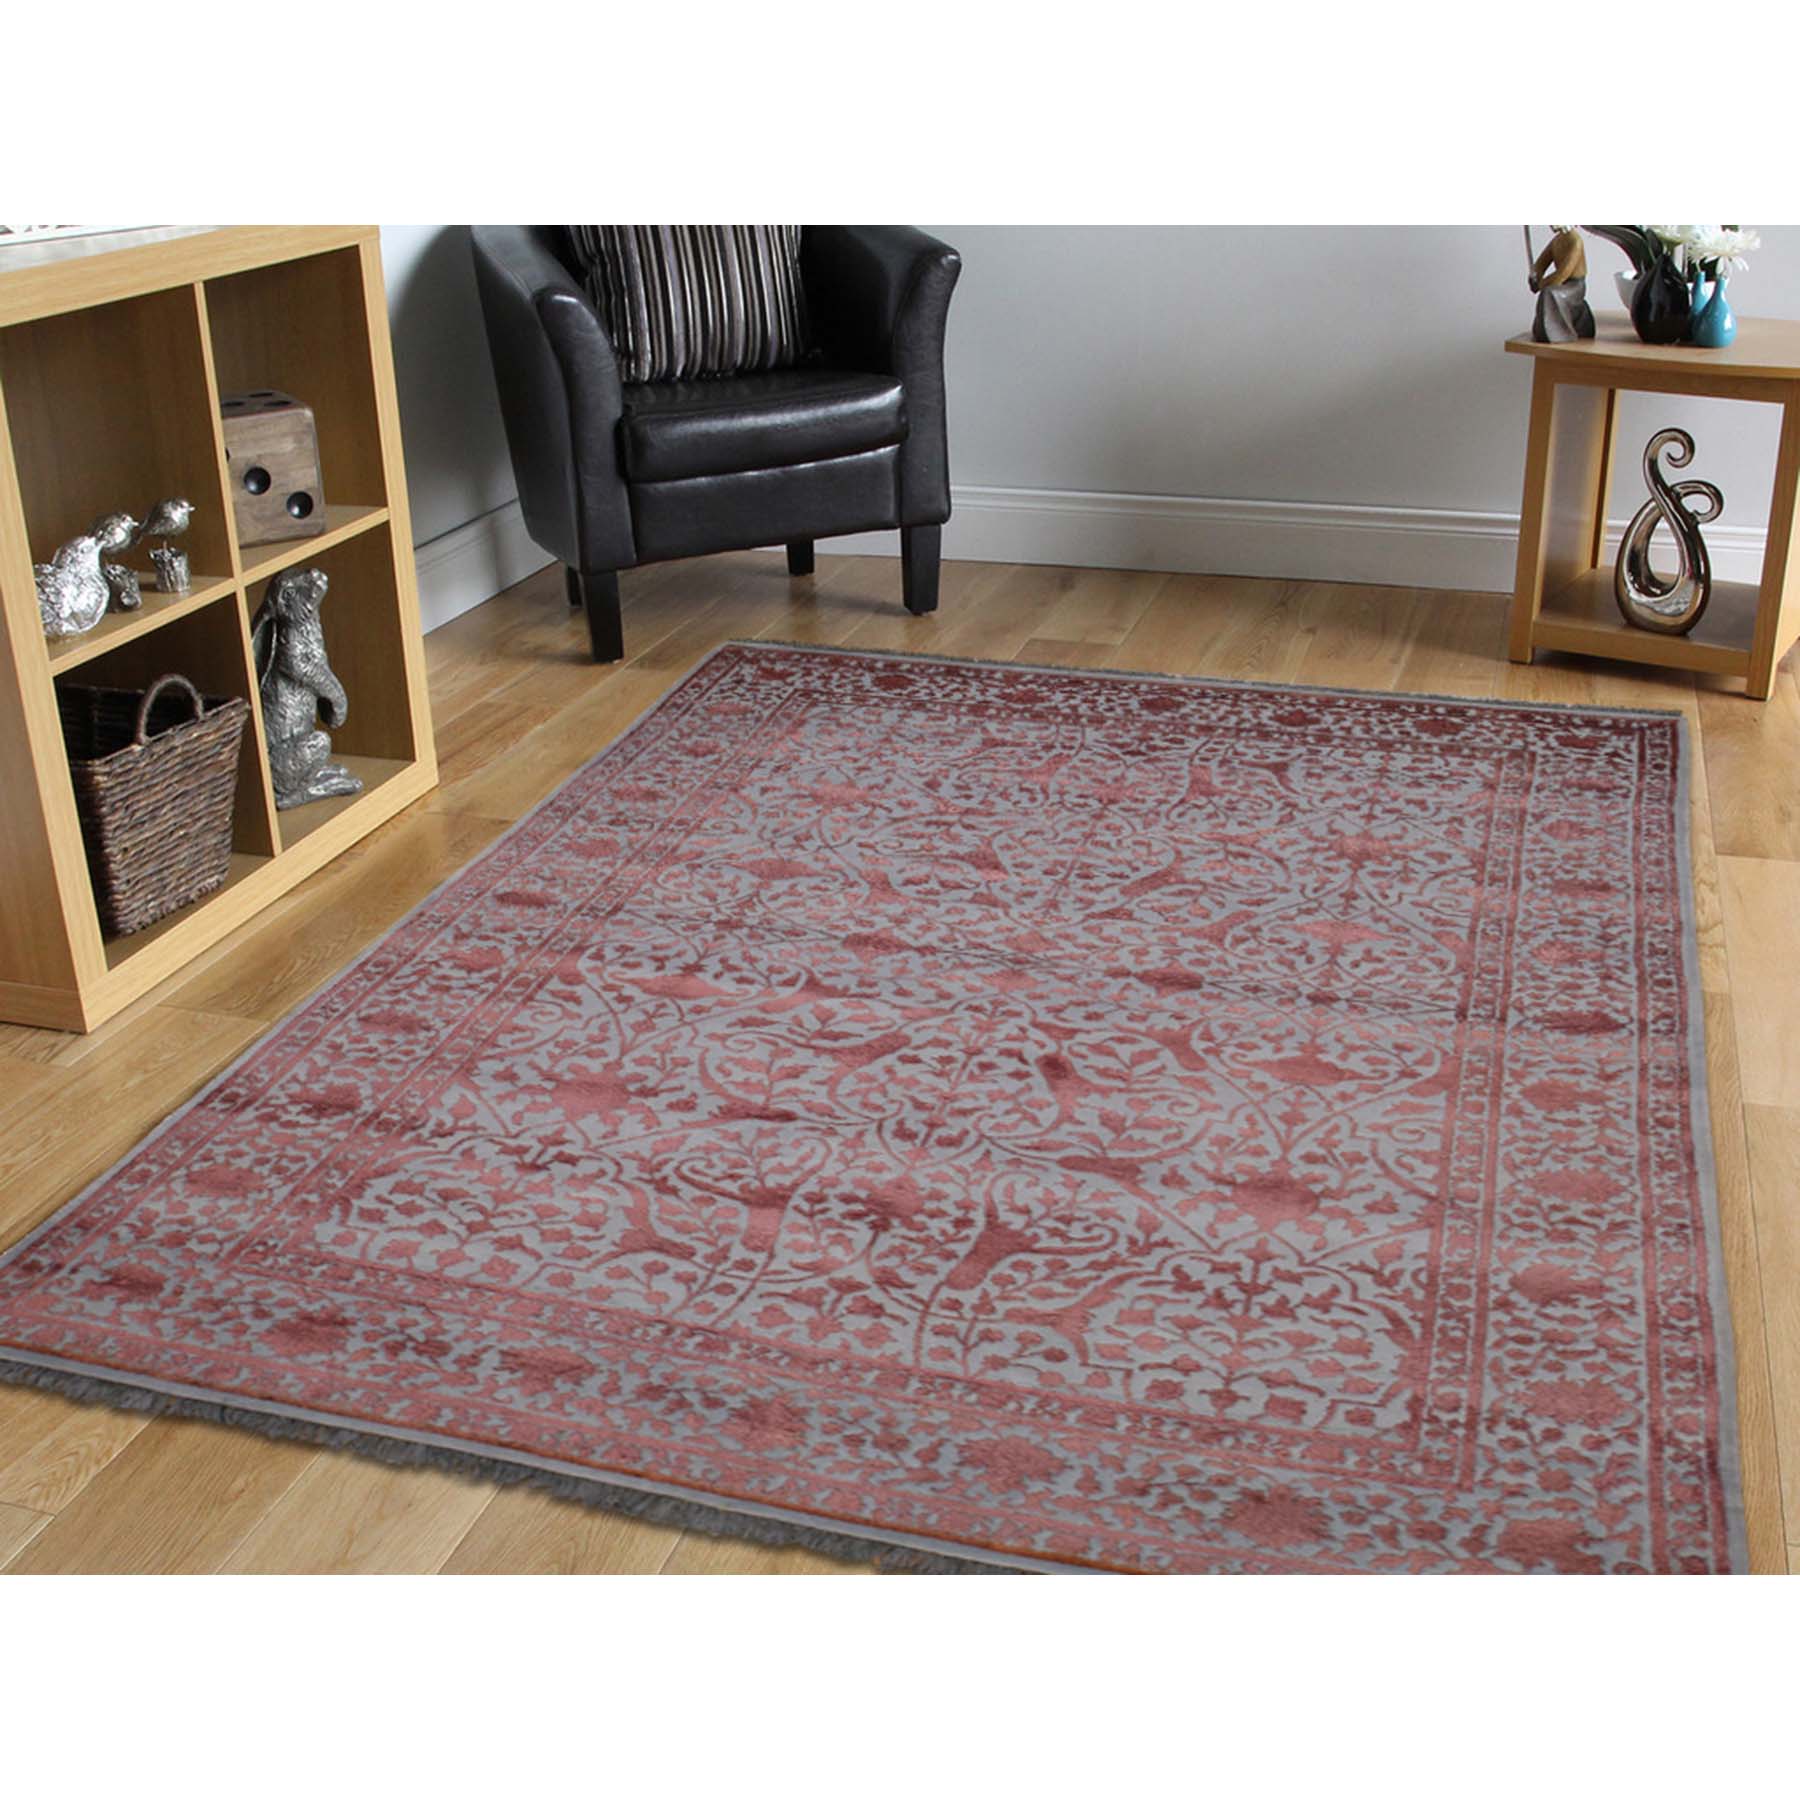 5-9 x9- Kashan Dense Weave Wool And Silk Hand-Knotted Pure Wool Rug 